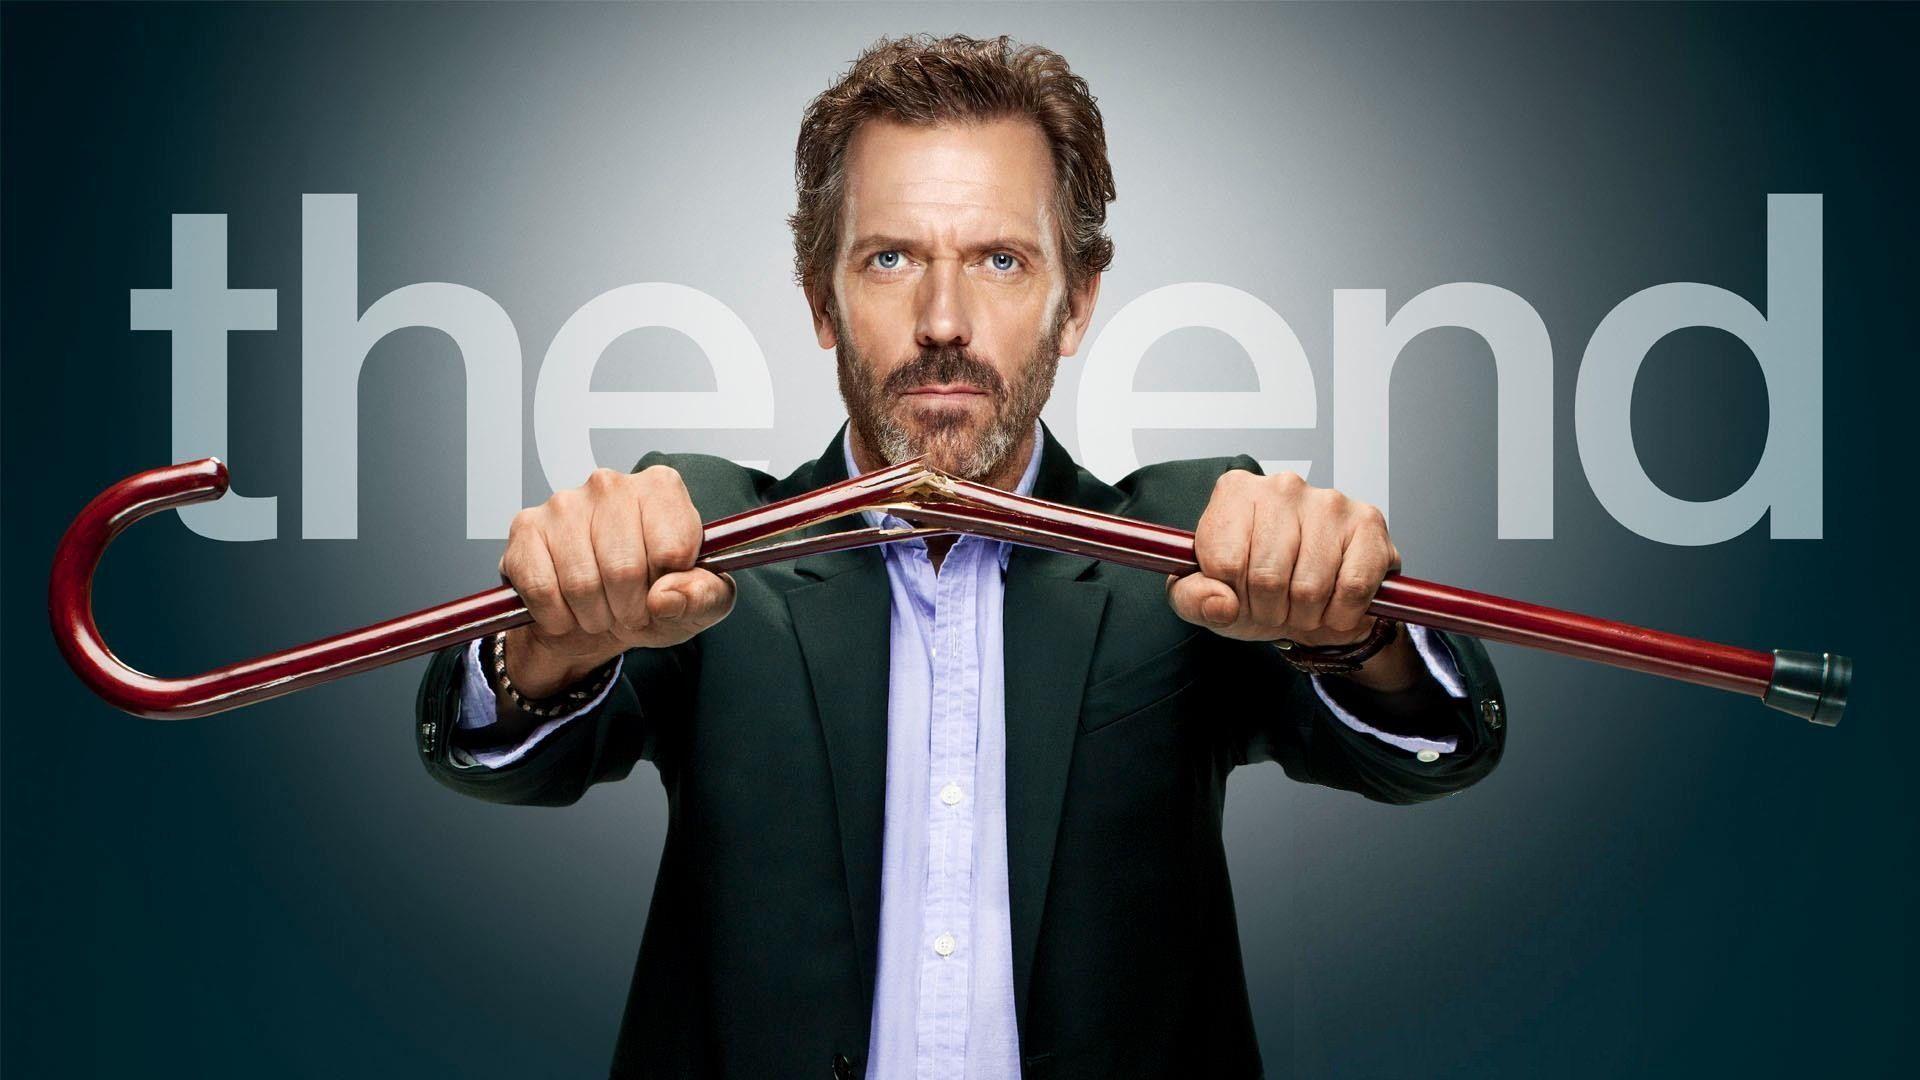 Dr House The End Wallpaper